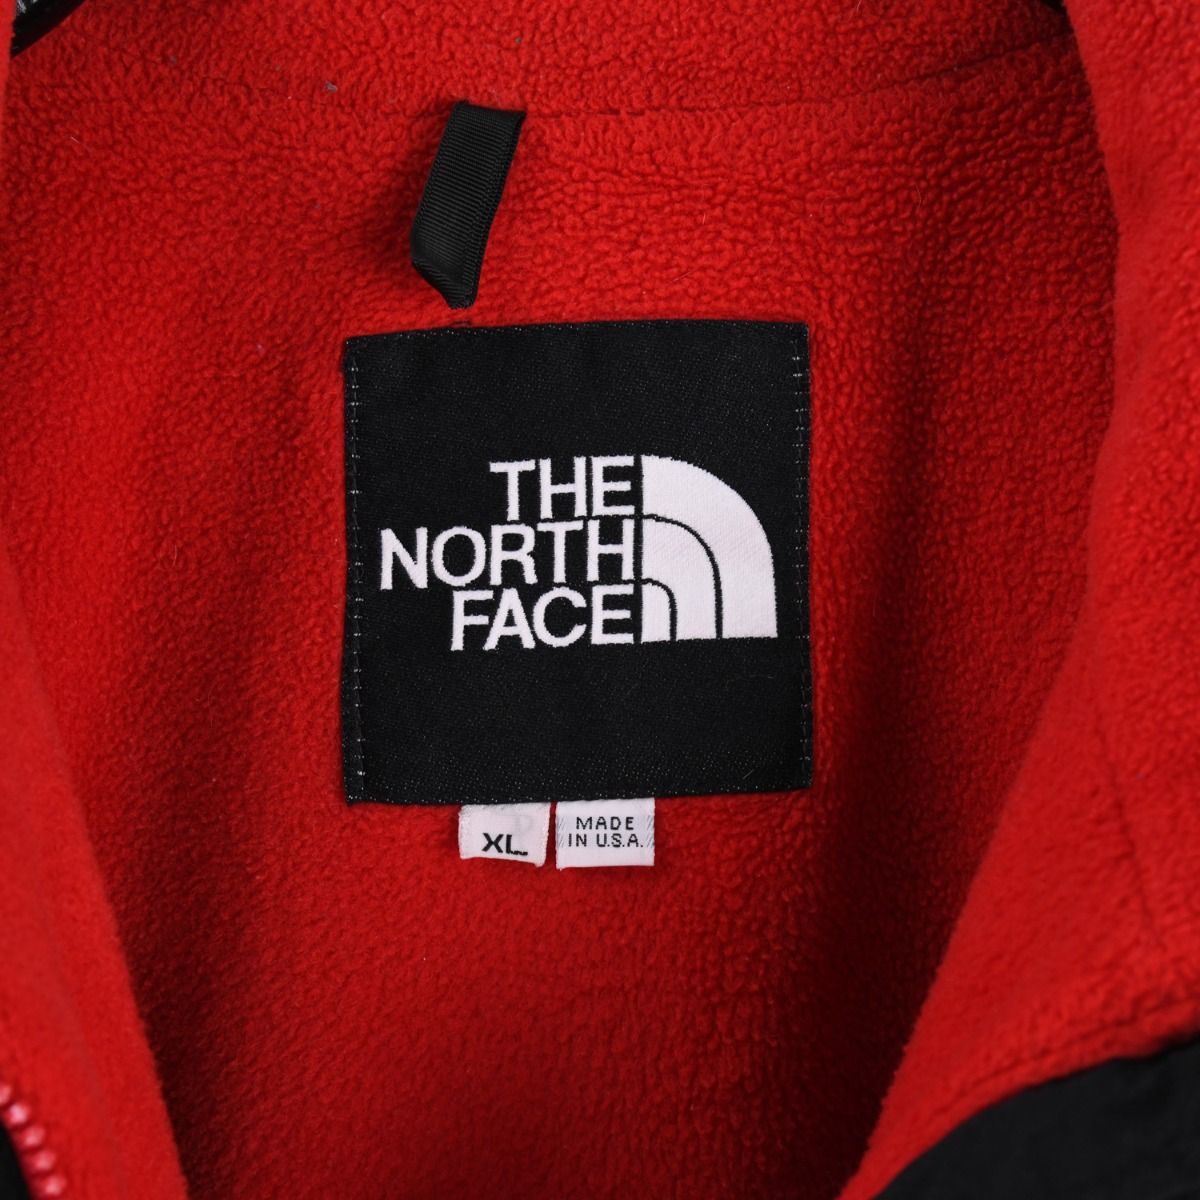 The North Face 1980s Fleece Lined Vest